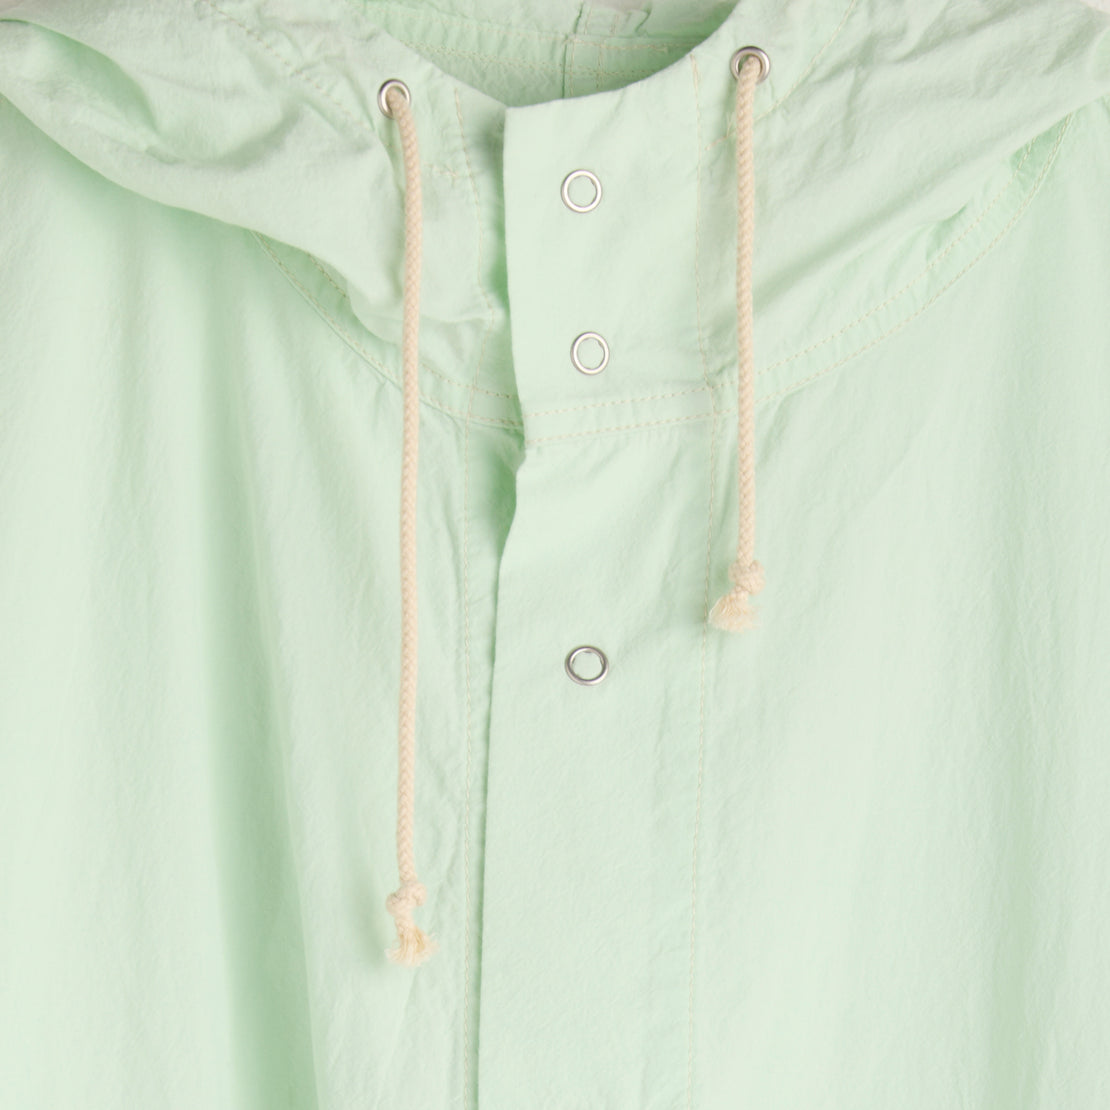 Spring Parka Coat - Mint Green - BEAMS BOY - STAG Provisions - W - Outerwear - Coat/Jacket